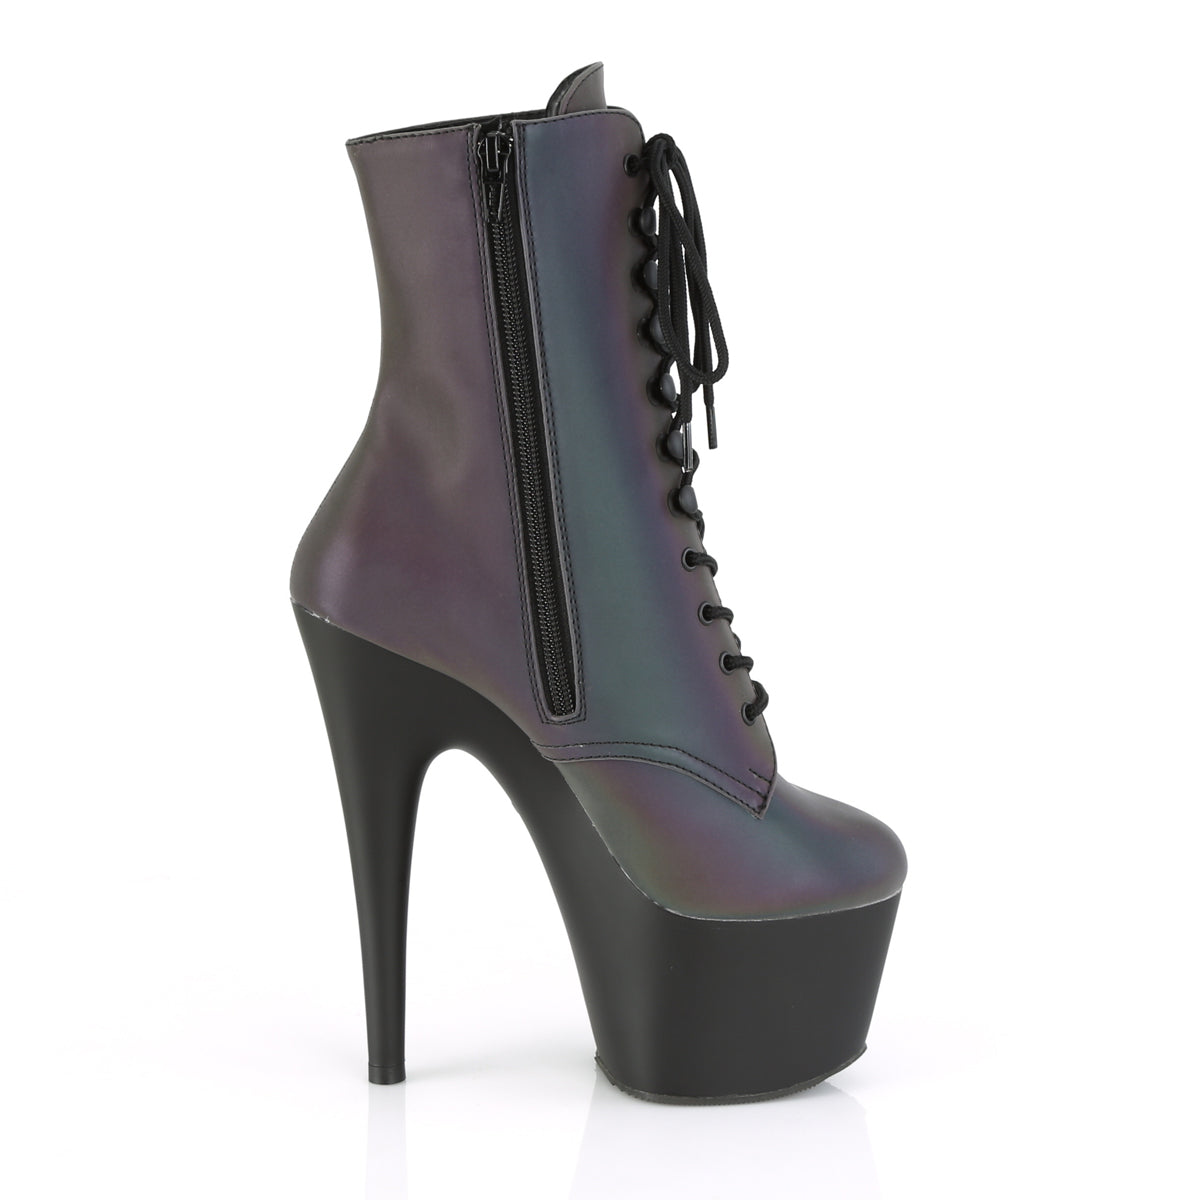 ADORE-1020REFL 7" Heel Green Multi Reflective Ankle Boots-Pleaser- Sexy Shoes Fetish Heels